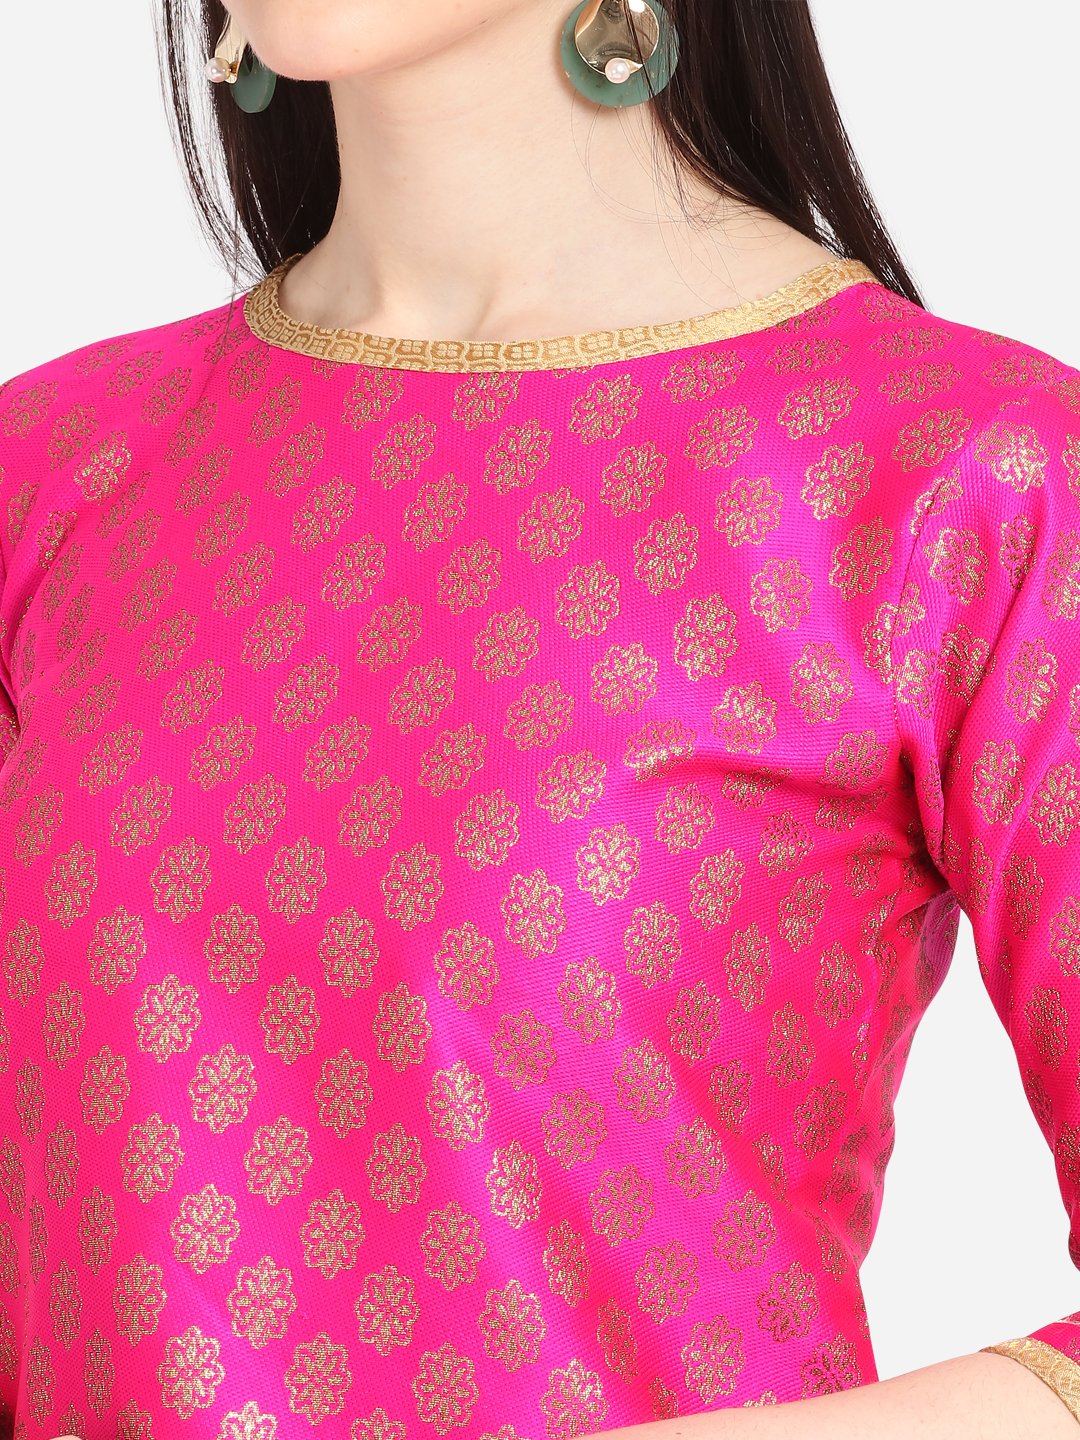 Pink And Green  Cotton  Jacquard Dress Material